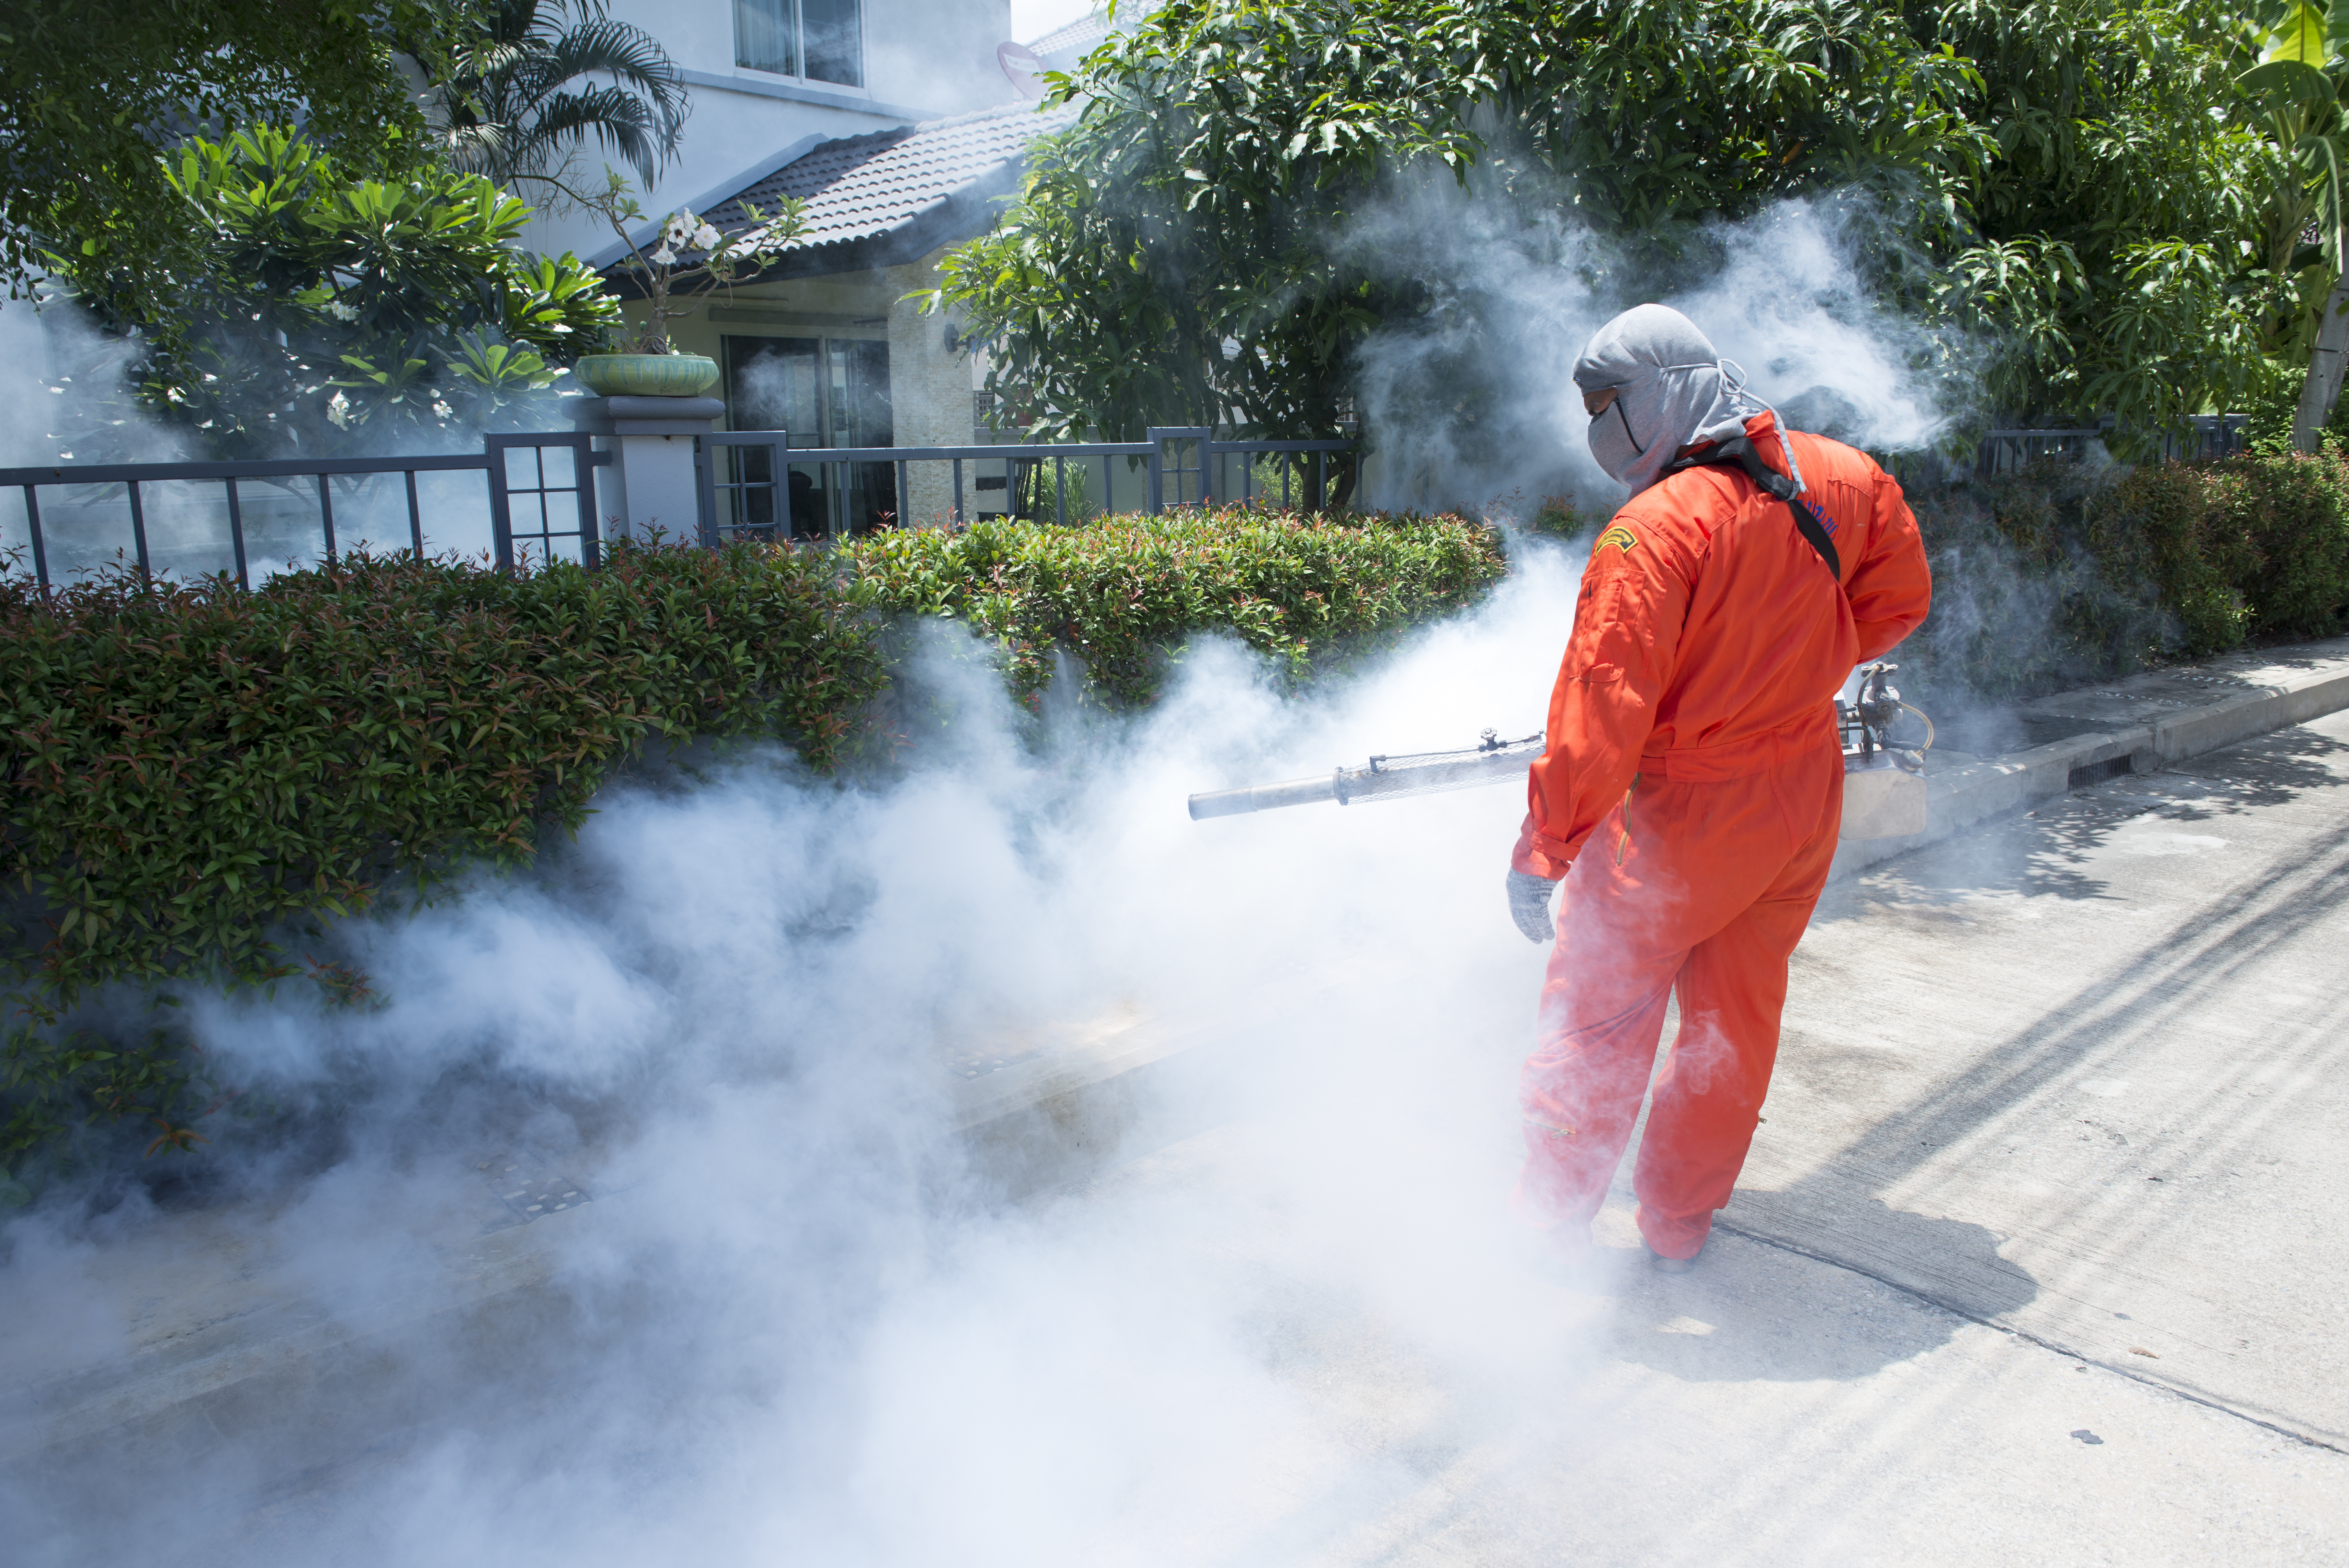 Workers are fogging for dengue control.